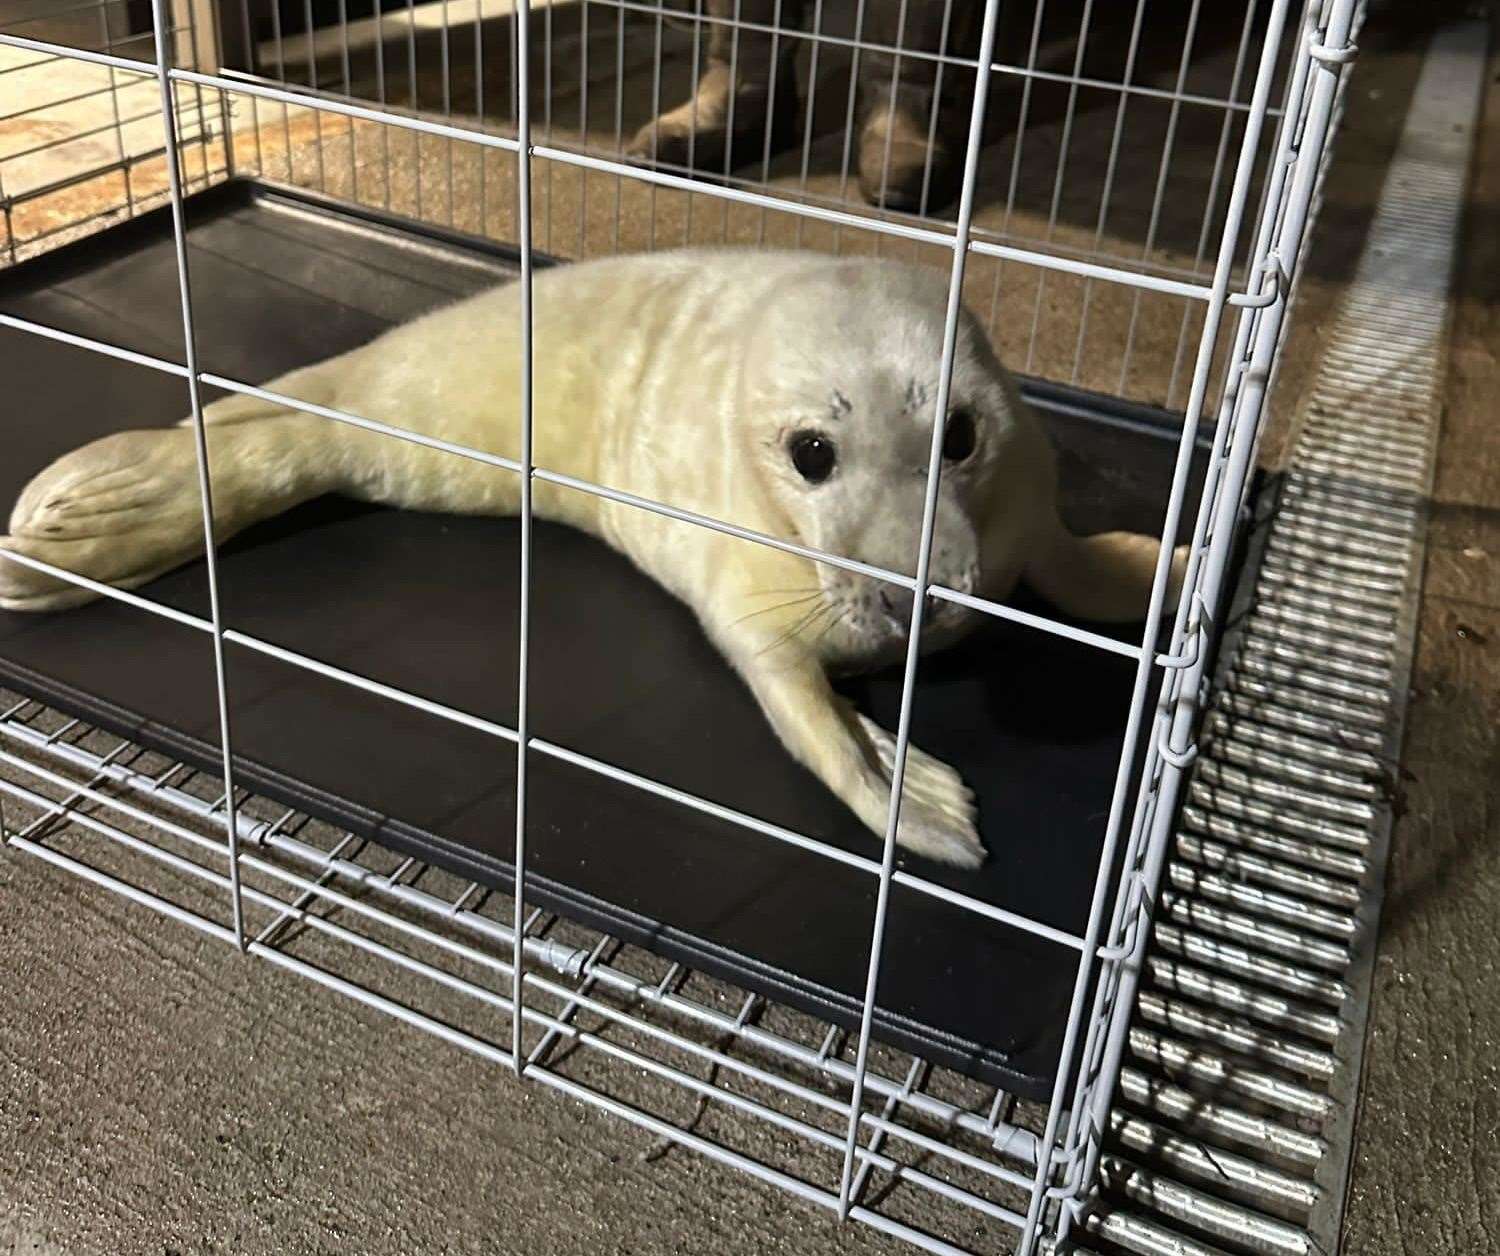 The seal pup rescued. Pictures taken by medics involved.